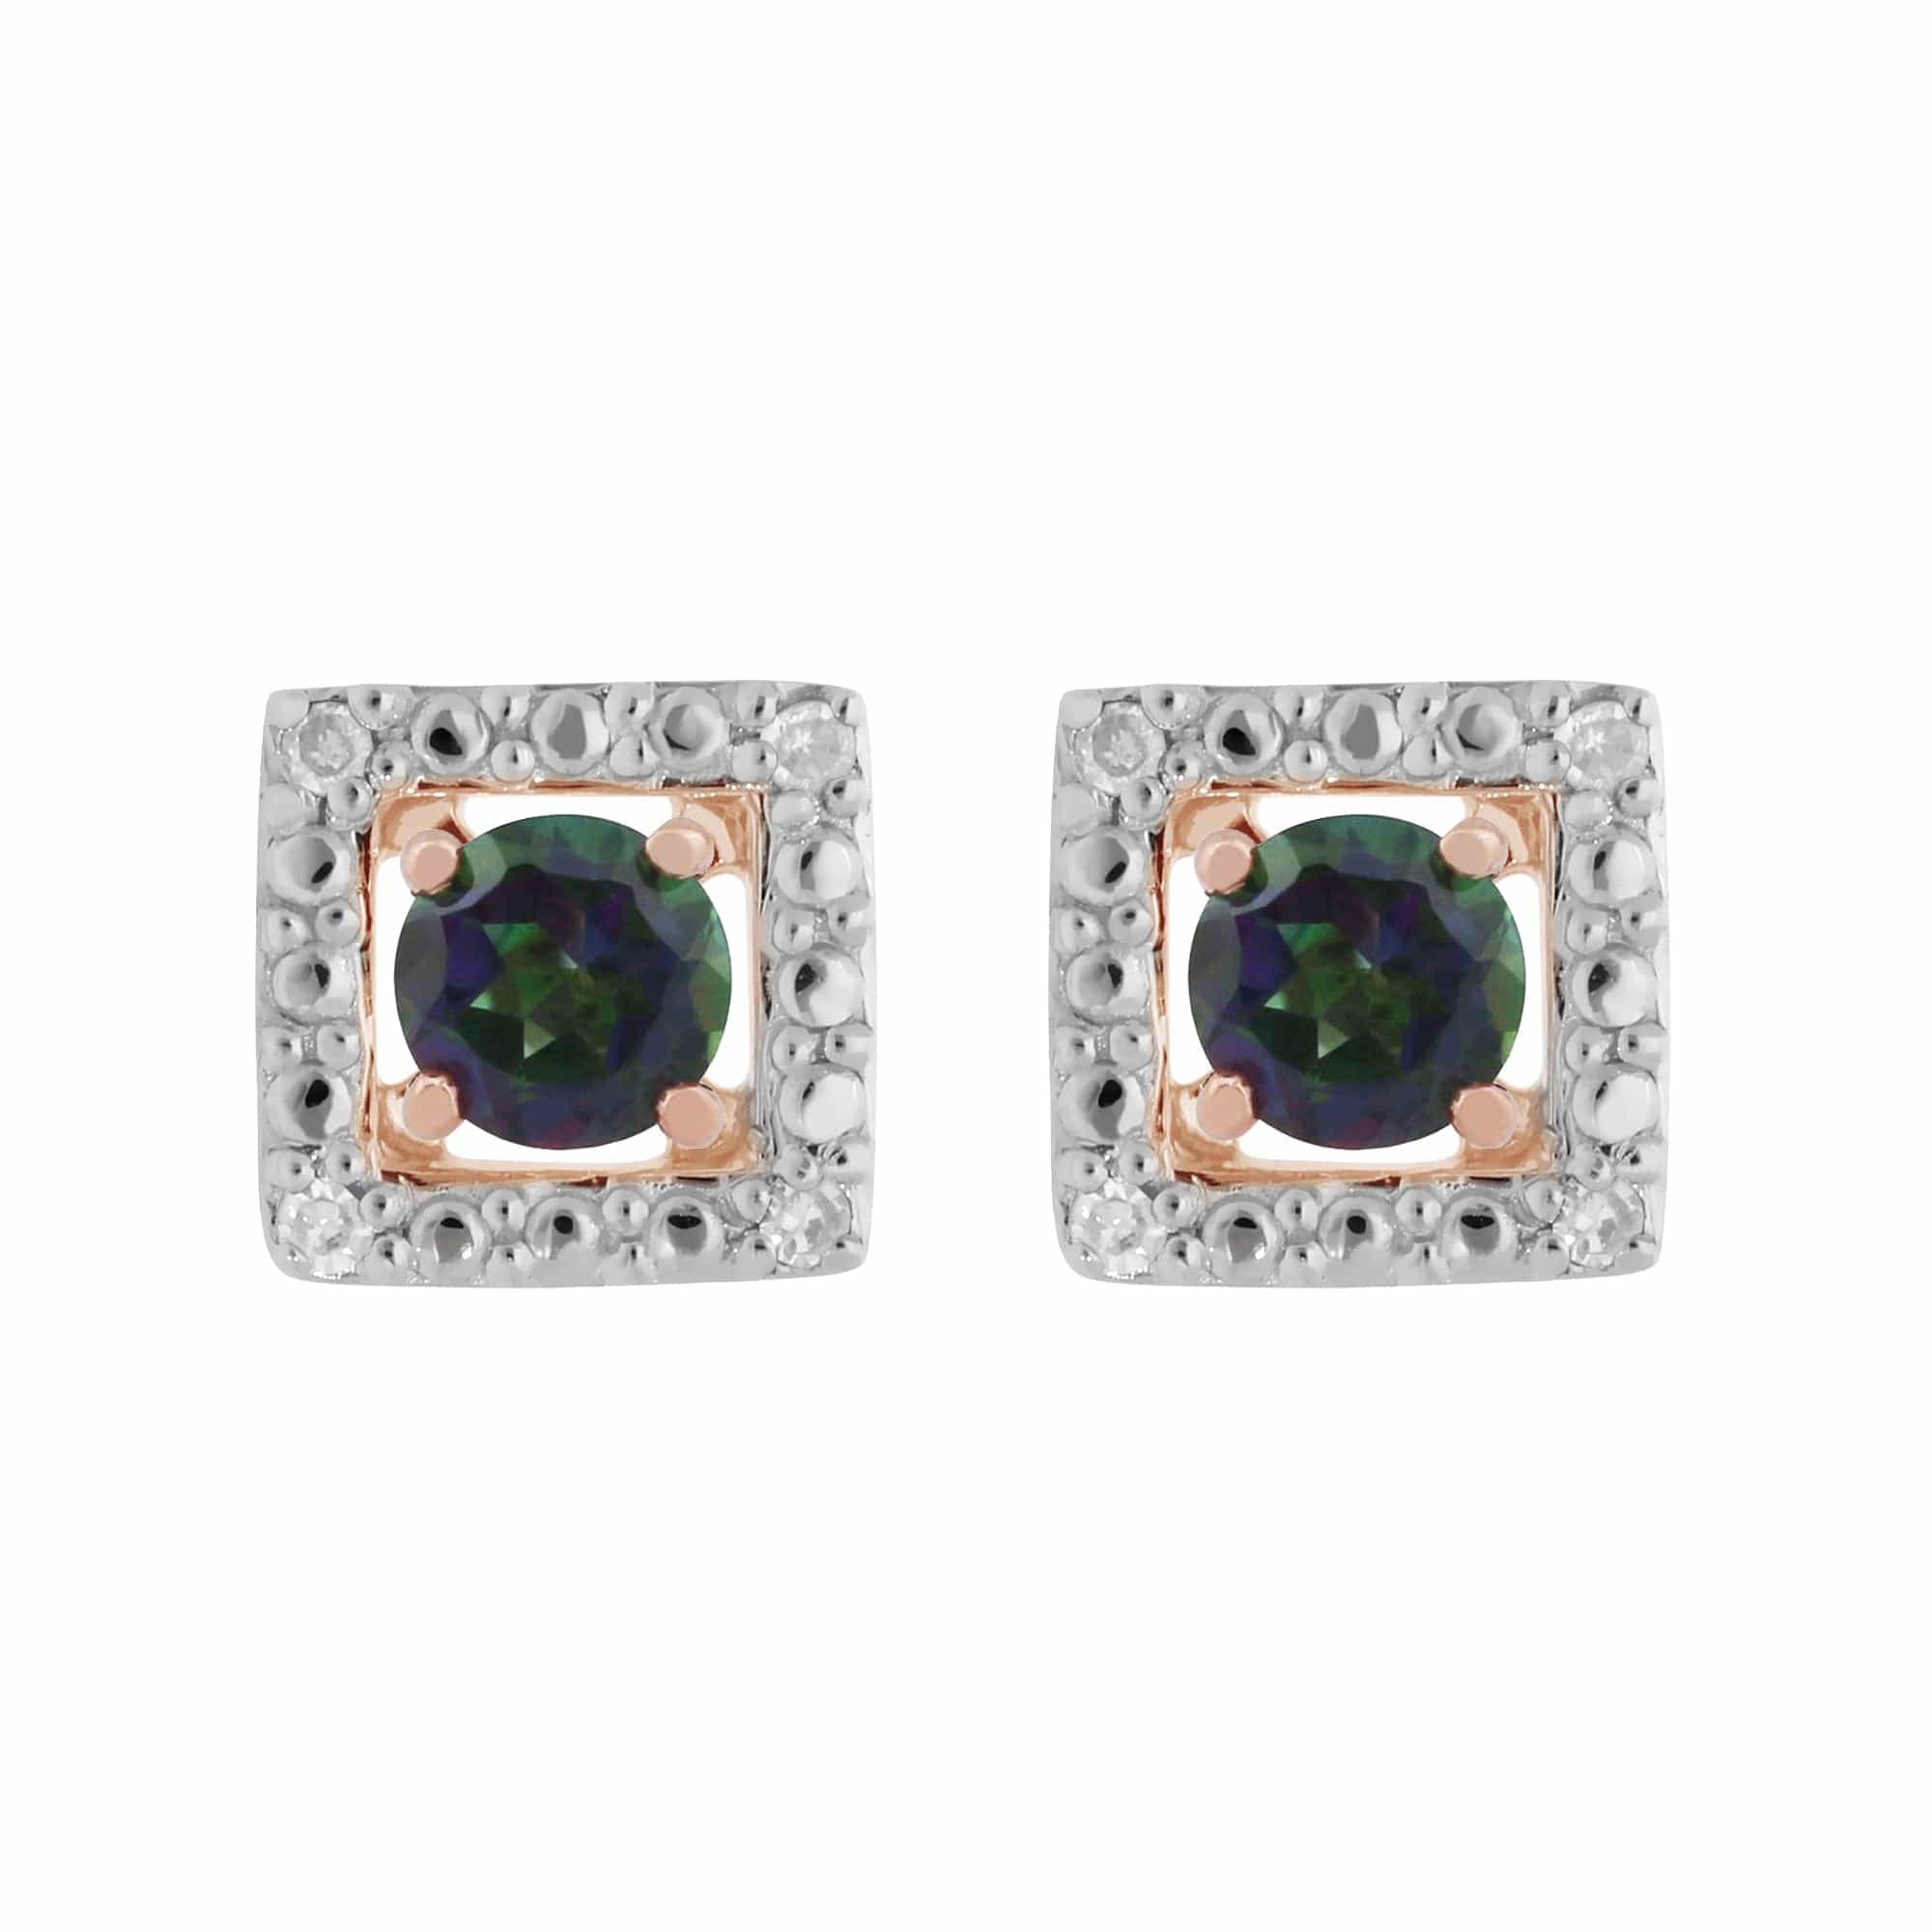 183E4316029-191E0380019 Classic Round Mystic Topaz Stud Earrings with Detachable Diamond Square Ear Jacket in 9ct Rose Gold 1